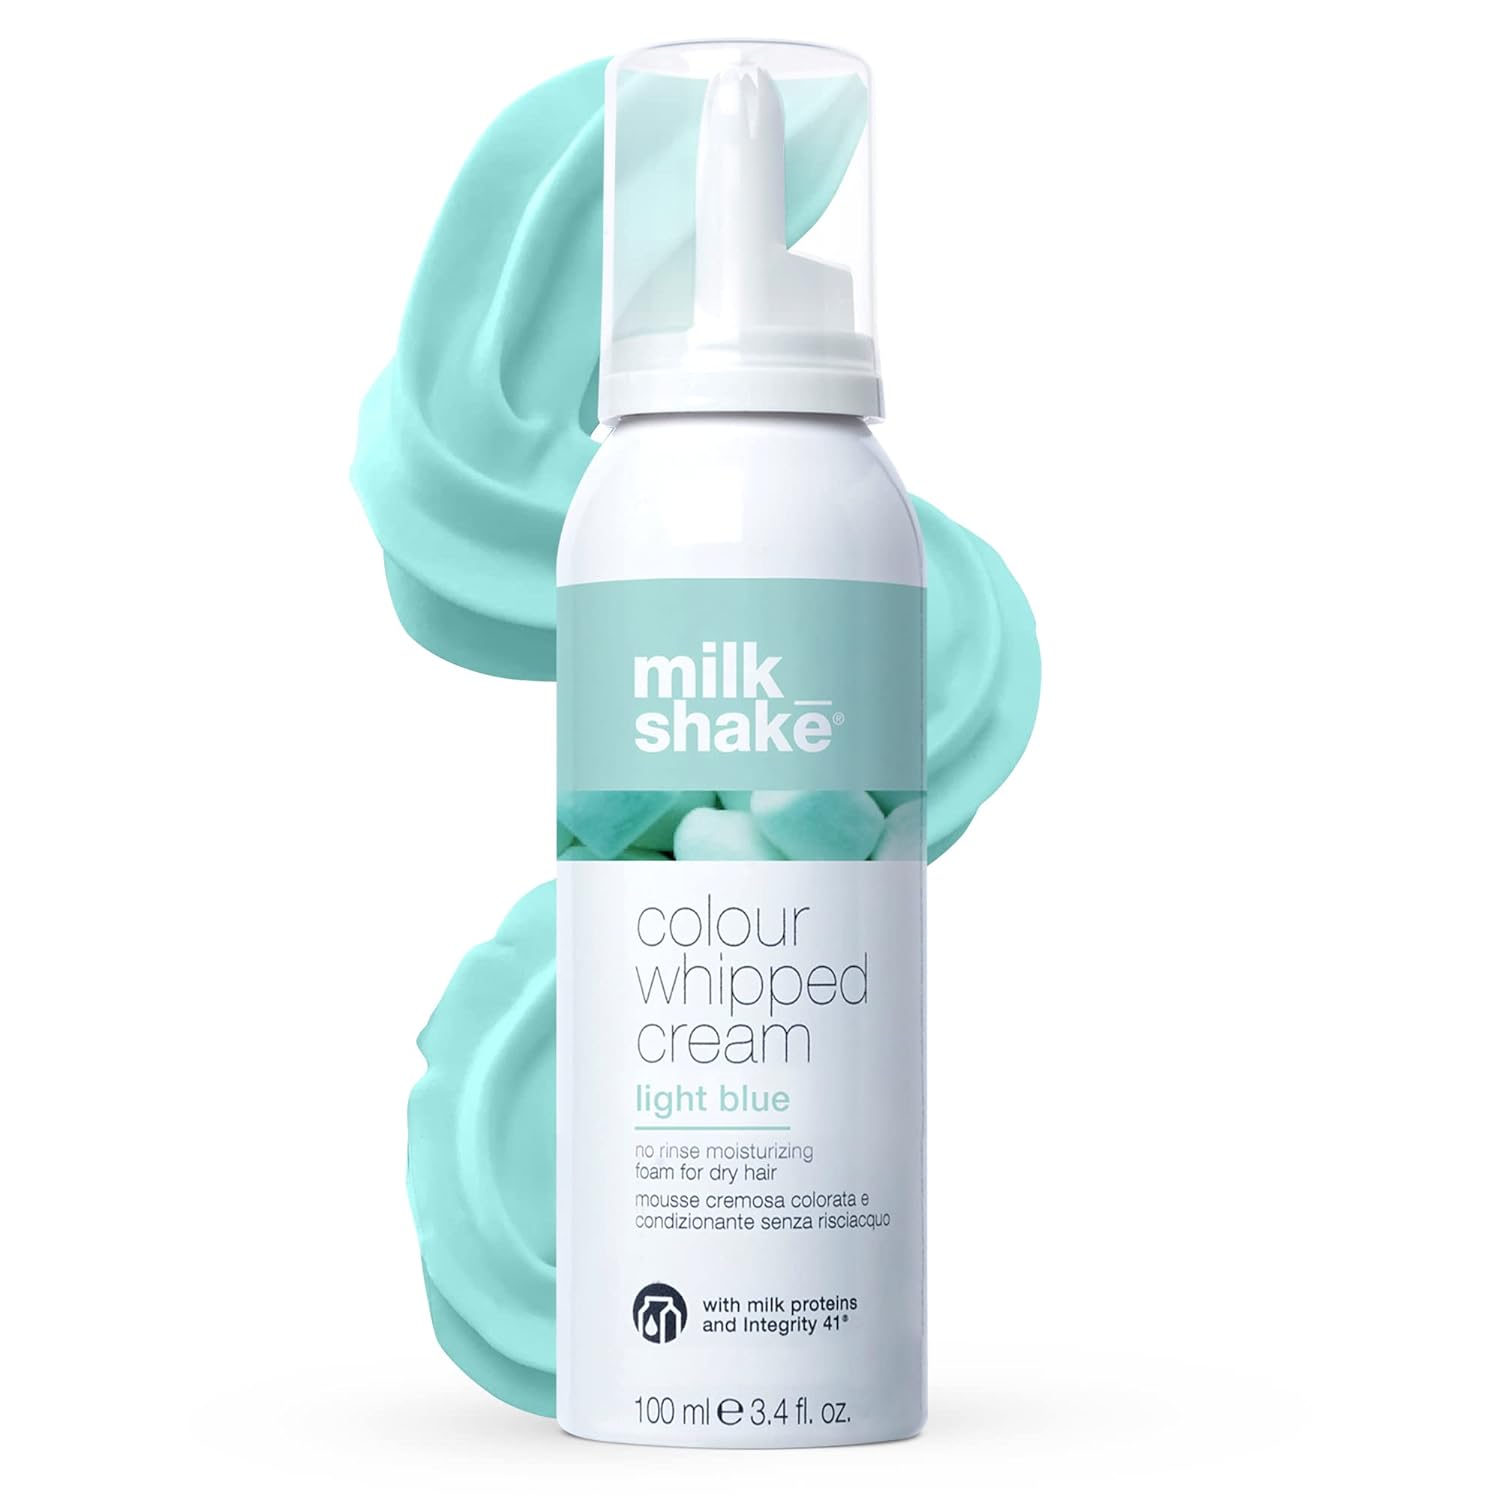 milk_shake Color Whipped Cream Leave In Coloring Conditioner - Provides Temporary Hair Color Tone, Light Blue